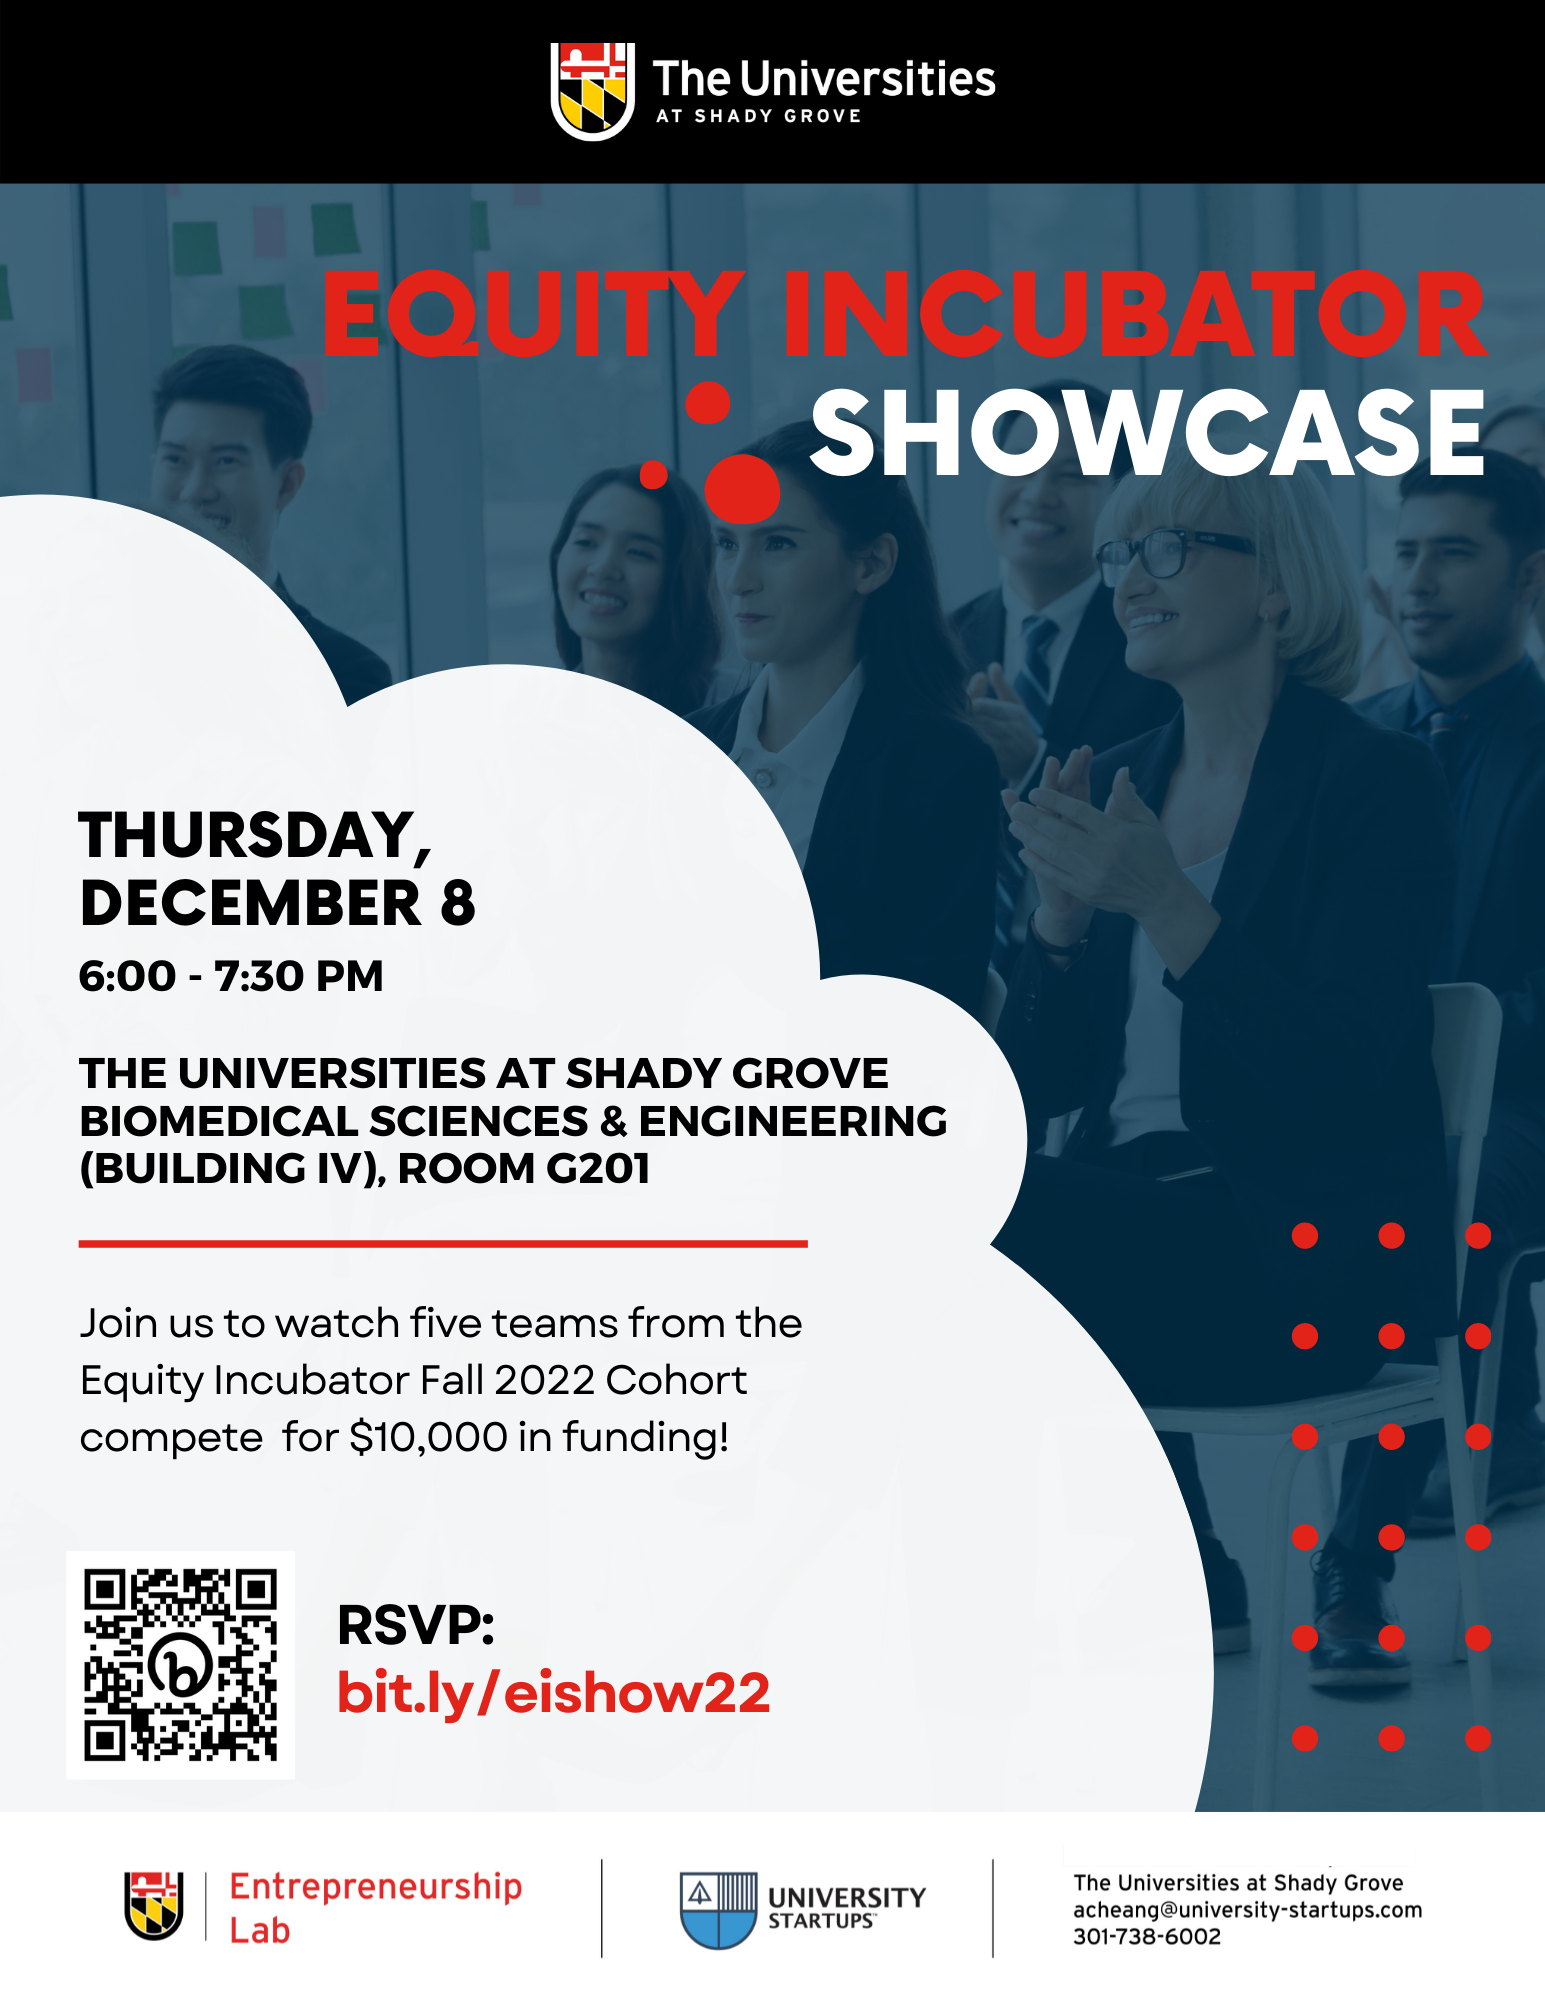 A flyer with information for the Fall 2022 Equity Incubator Showcase on December 8th, 6 to 7:30 pm at the Universities at Shady Grove, Building 4, Room G201